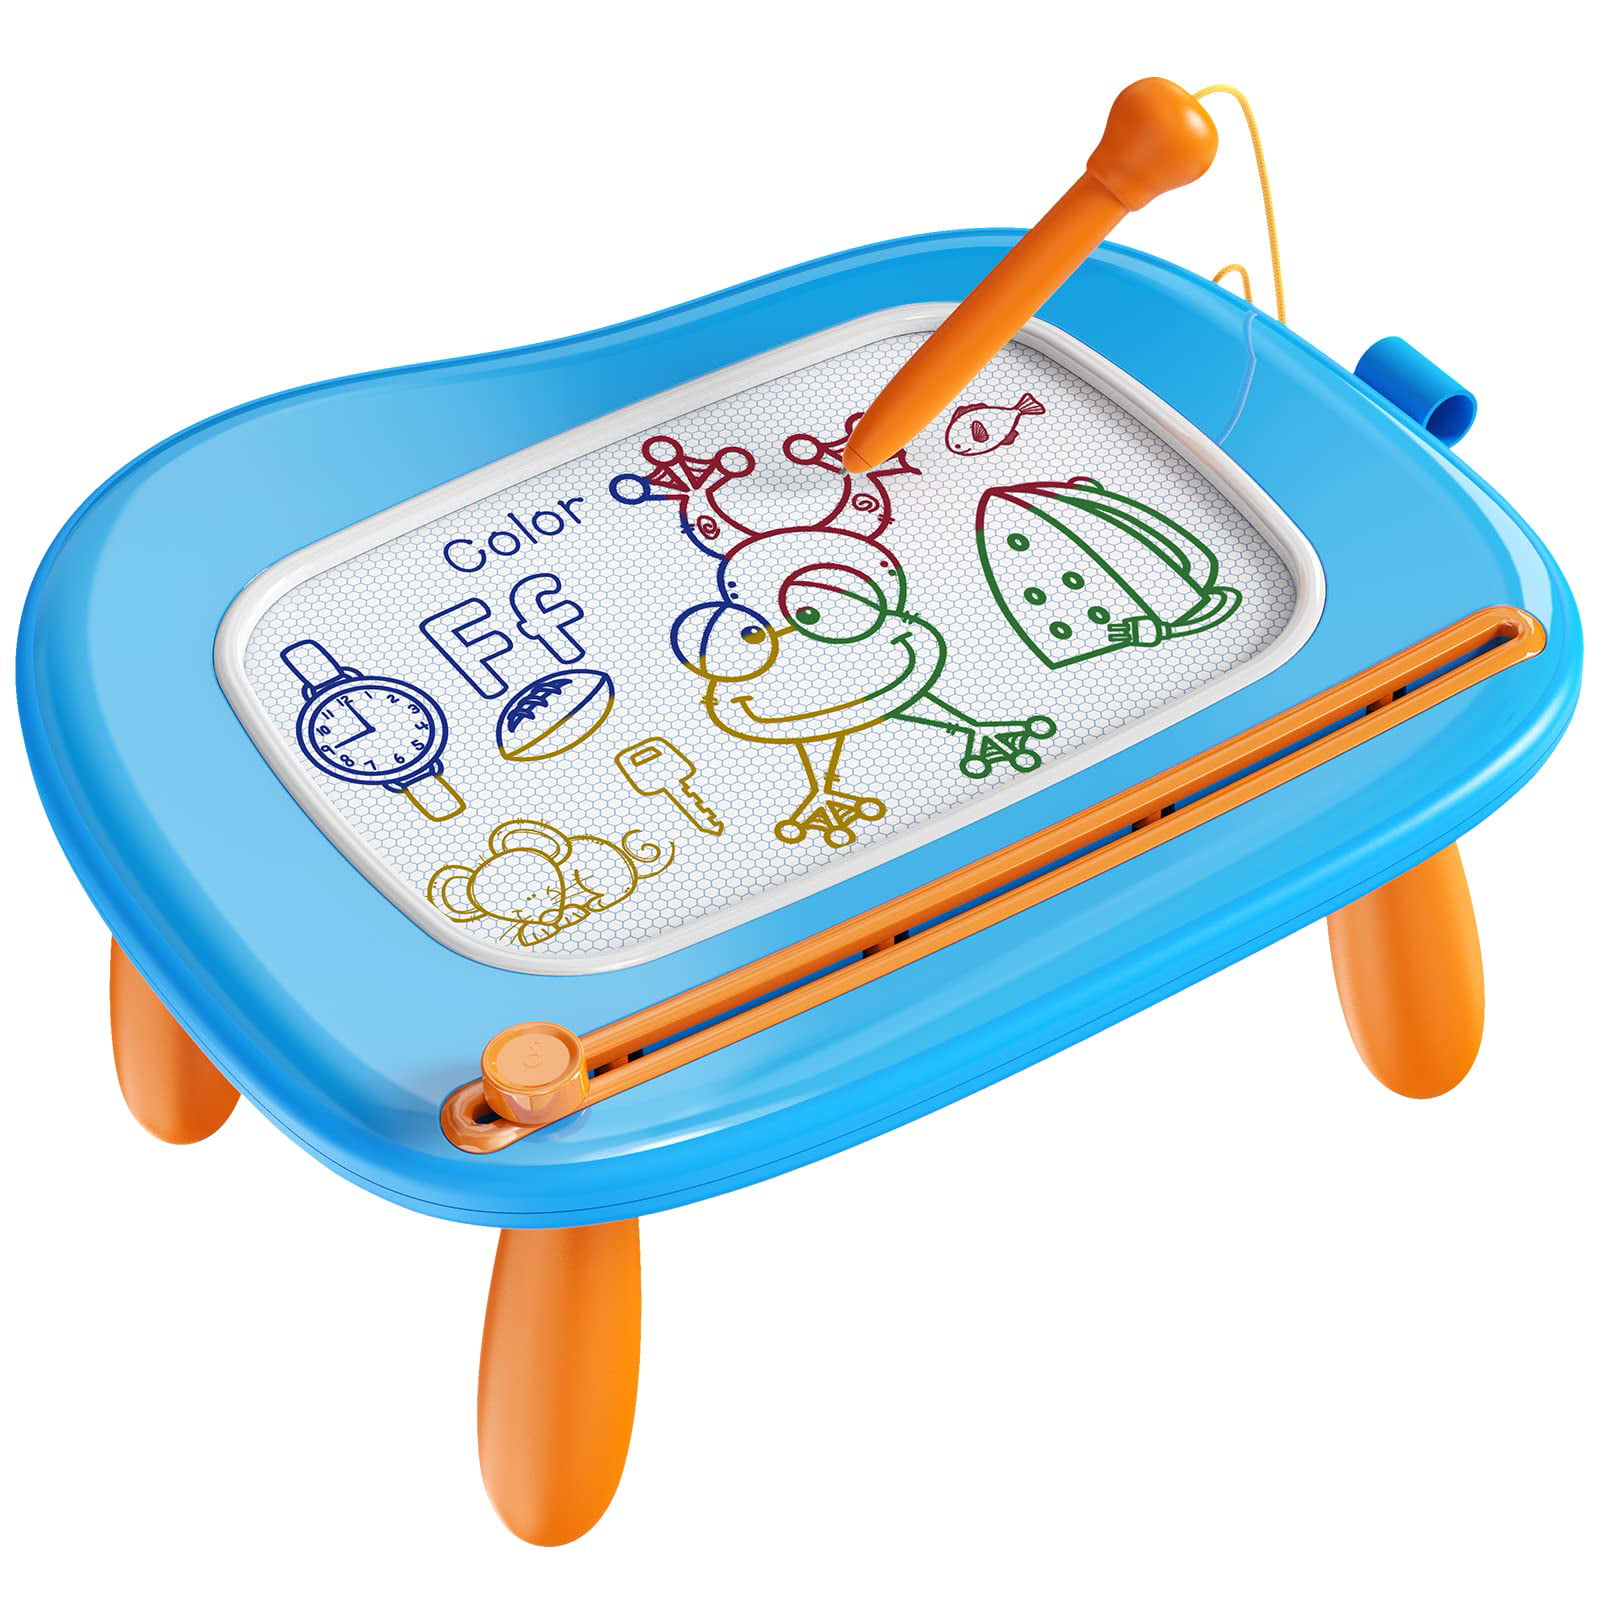 DRAWING PADS FOR KIDS - DOODLE DRAWING BOARDS - Sensory Stand